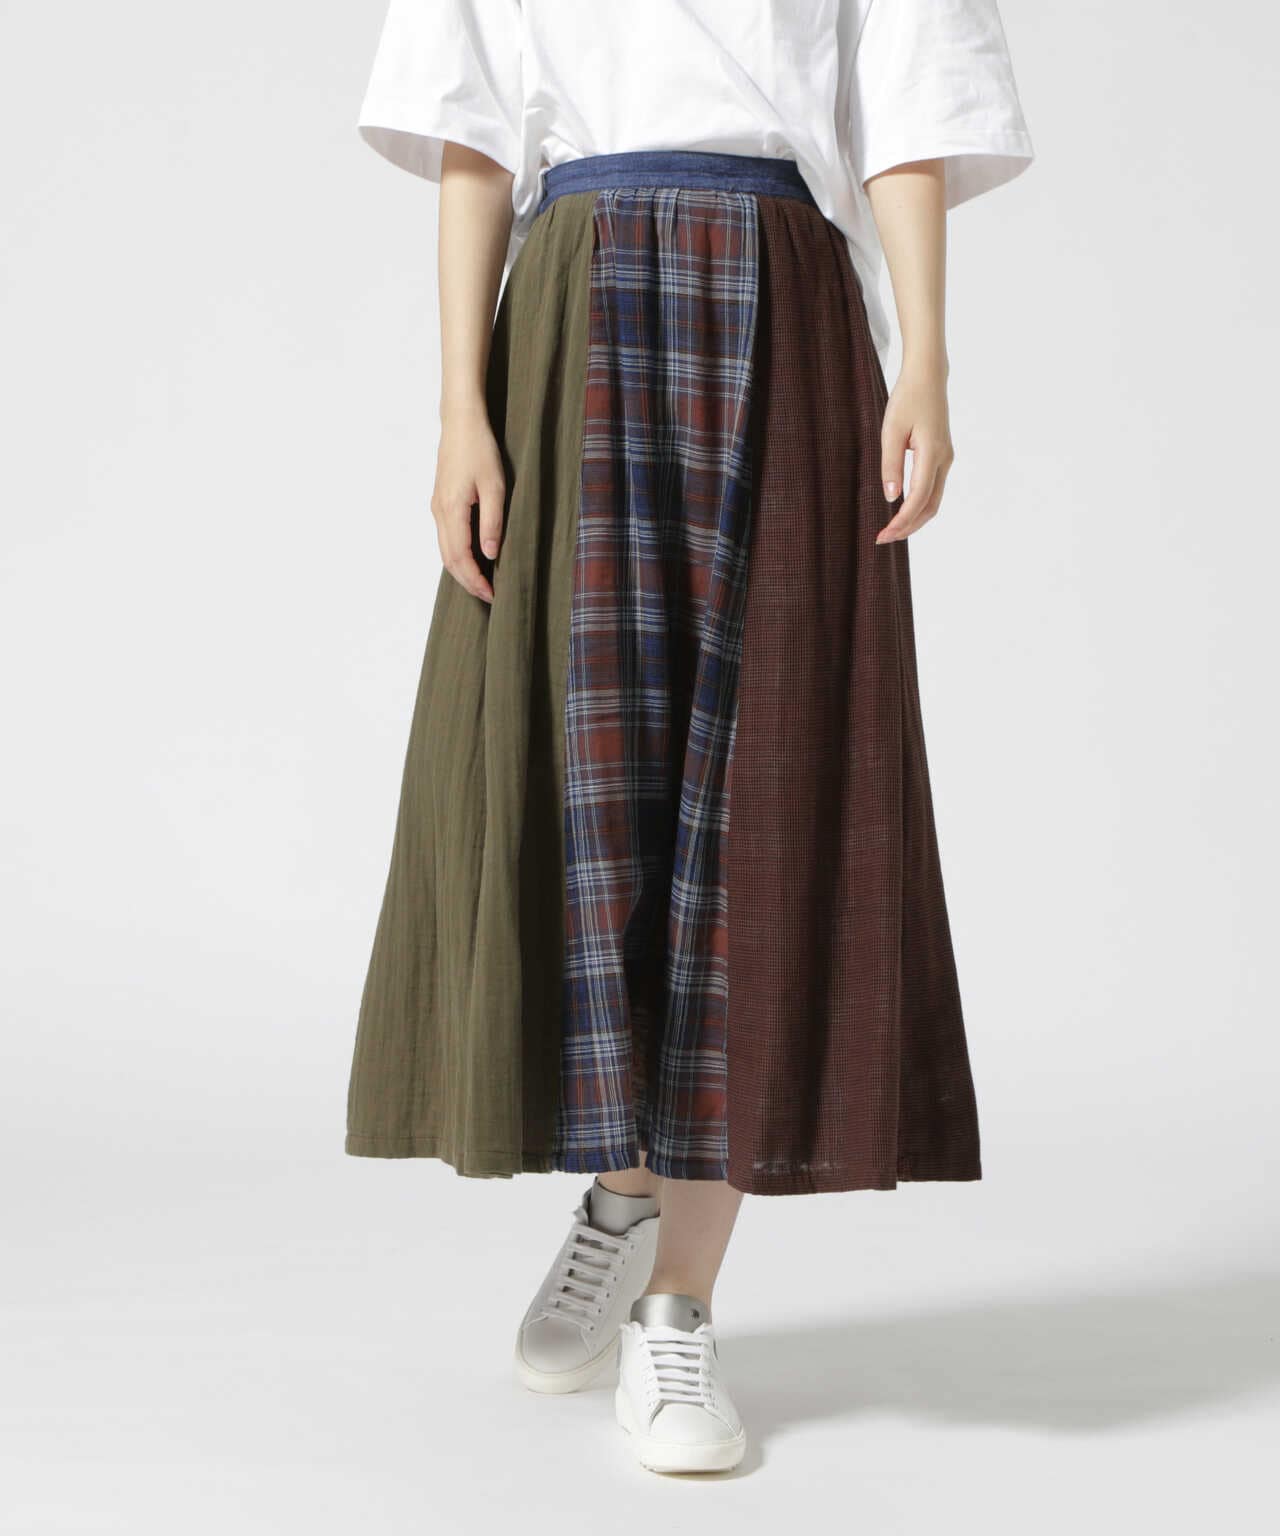 REBUILD COLLECTION》PATCHING PLAID SKIRT/ パッチング プレイド